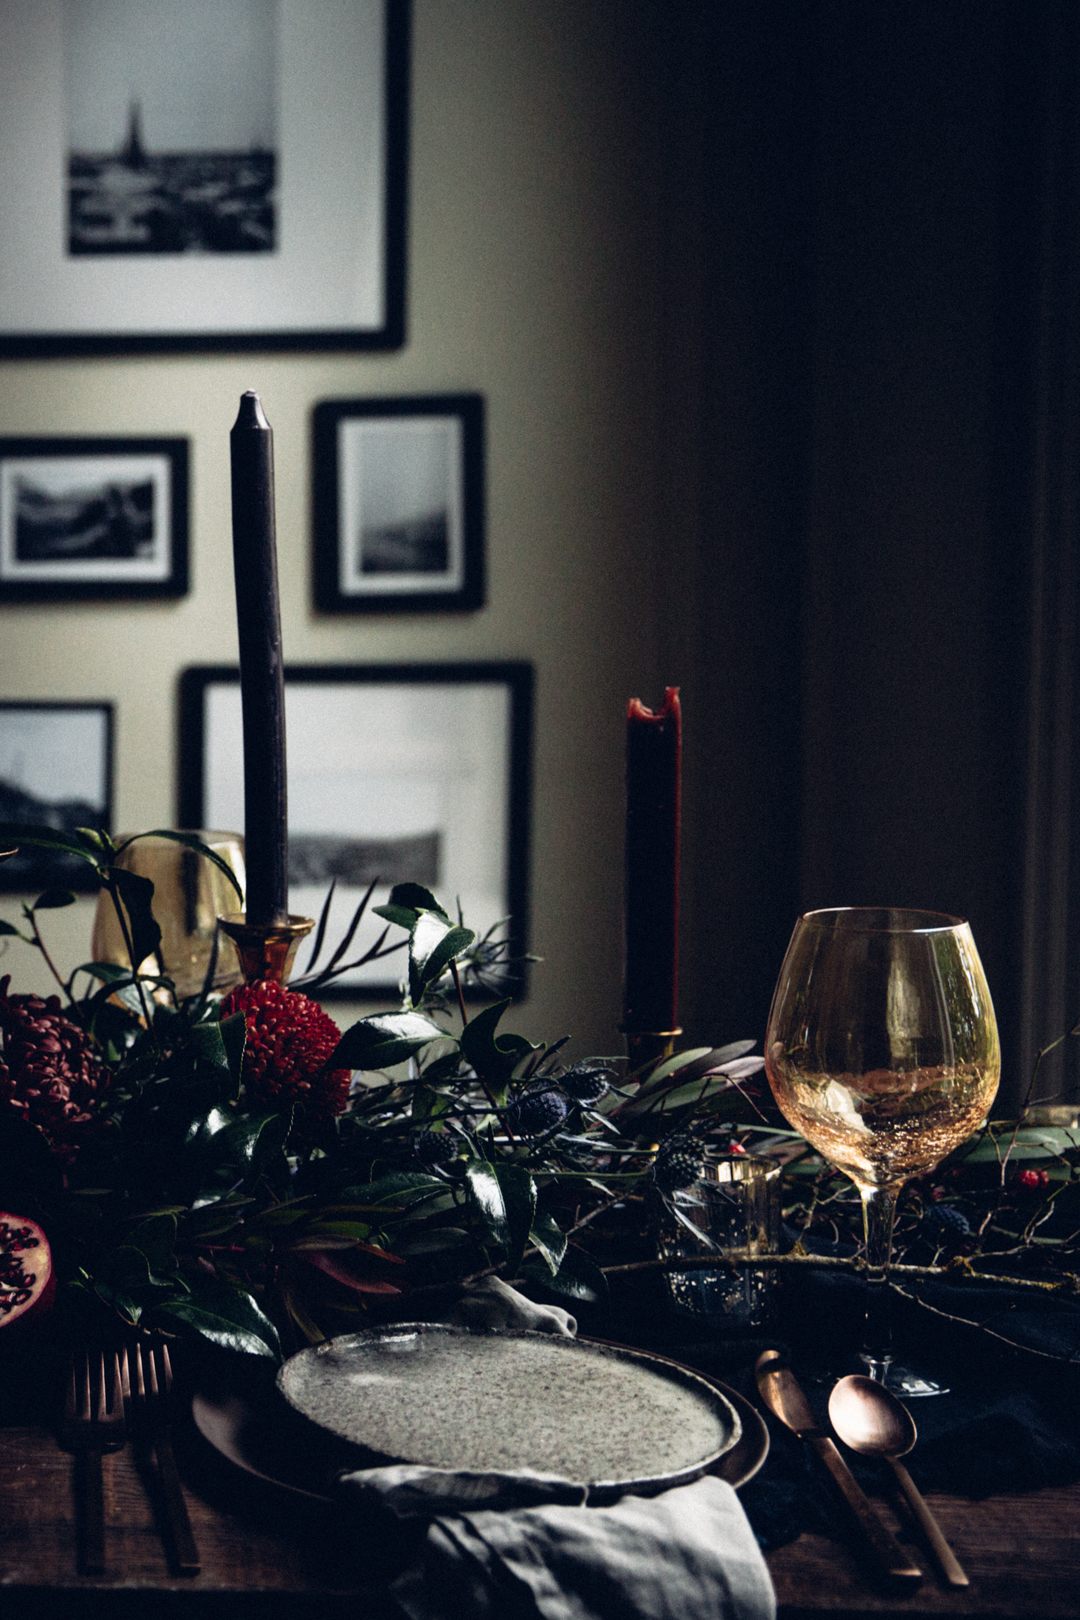 holiday-gatherings-photography-styling-by-christiannkoepke-com-4